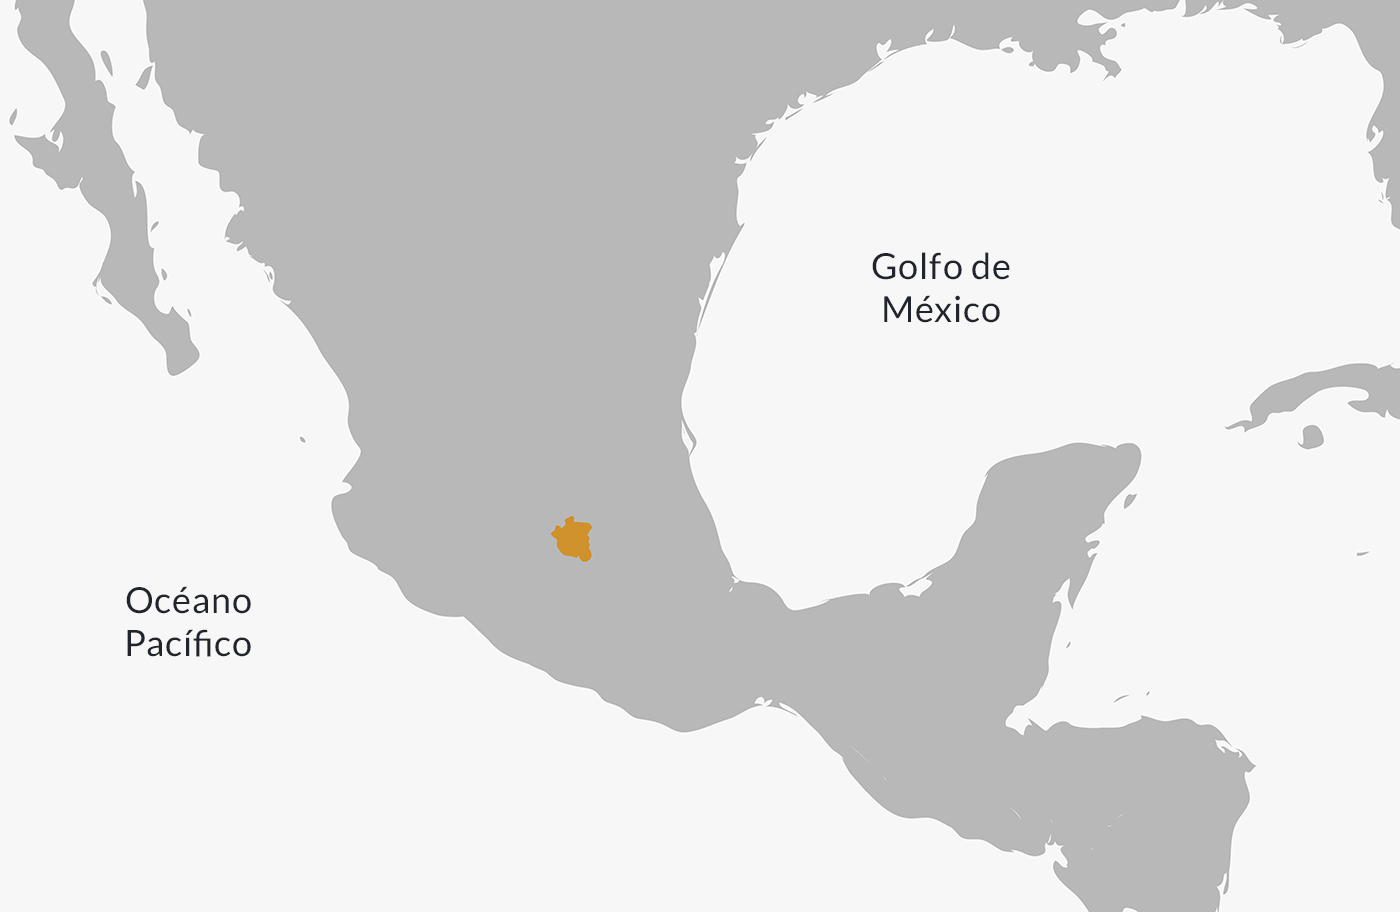 Location on the map of the Teotihuacan culture.